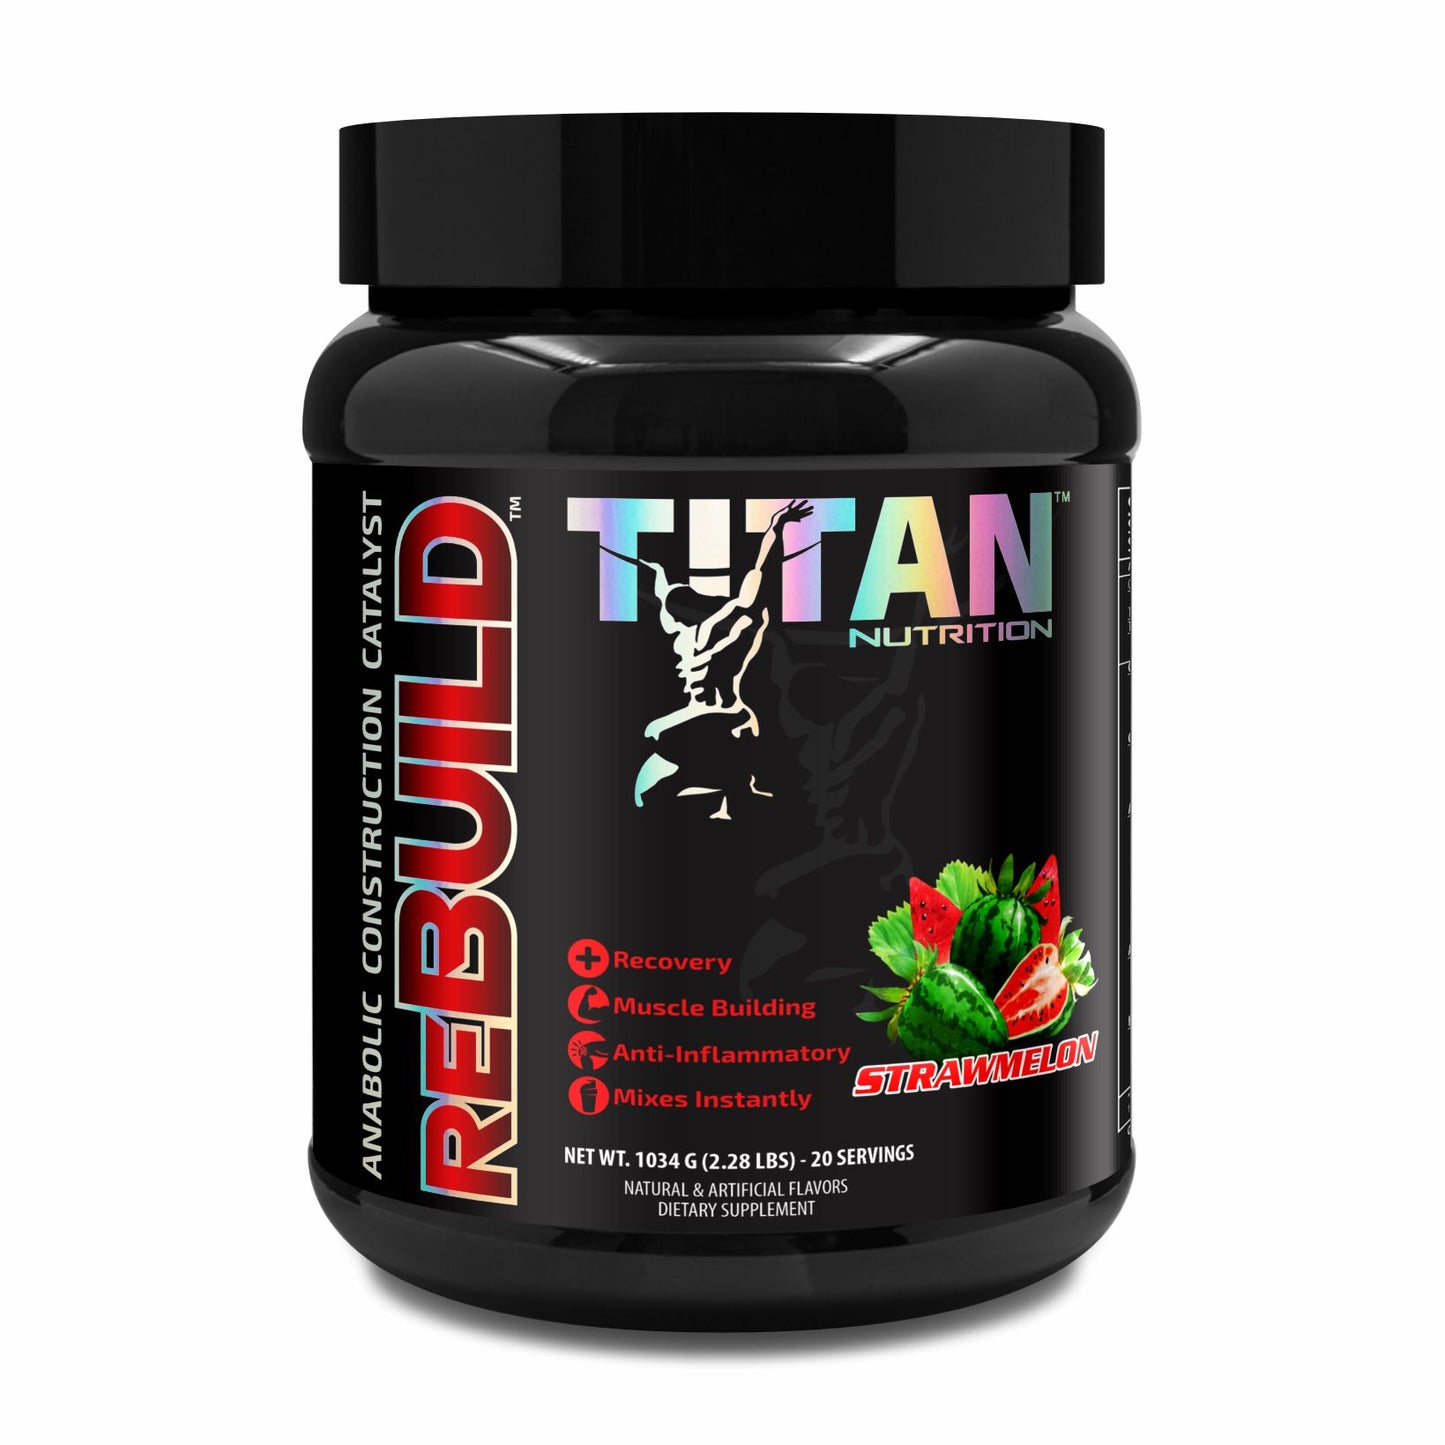 ReBUILD™ - Post Workout Recovery Shake